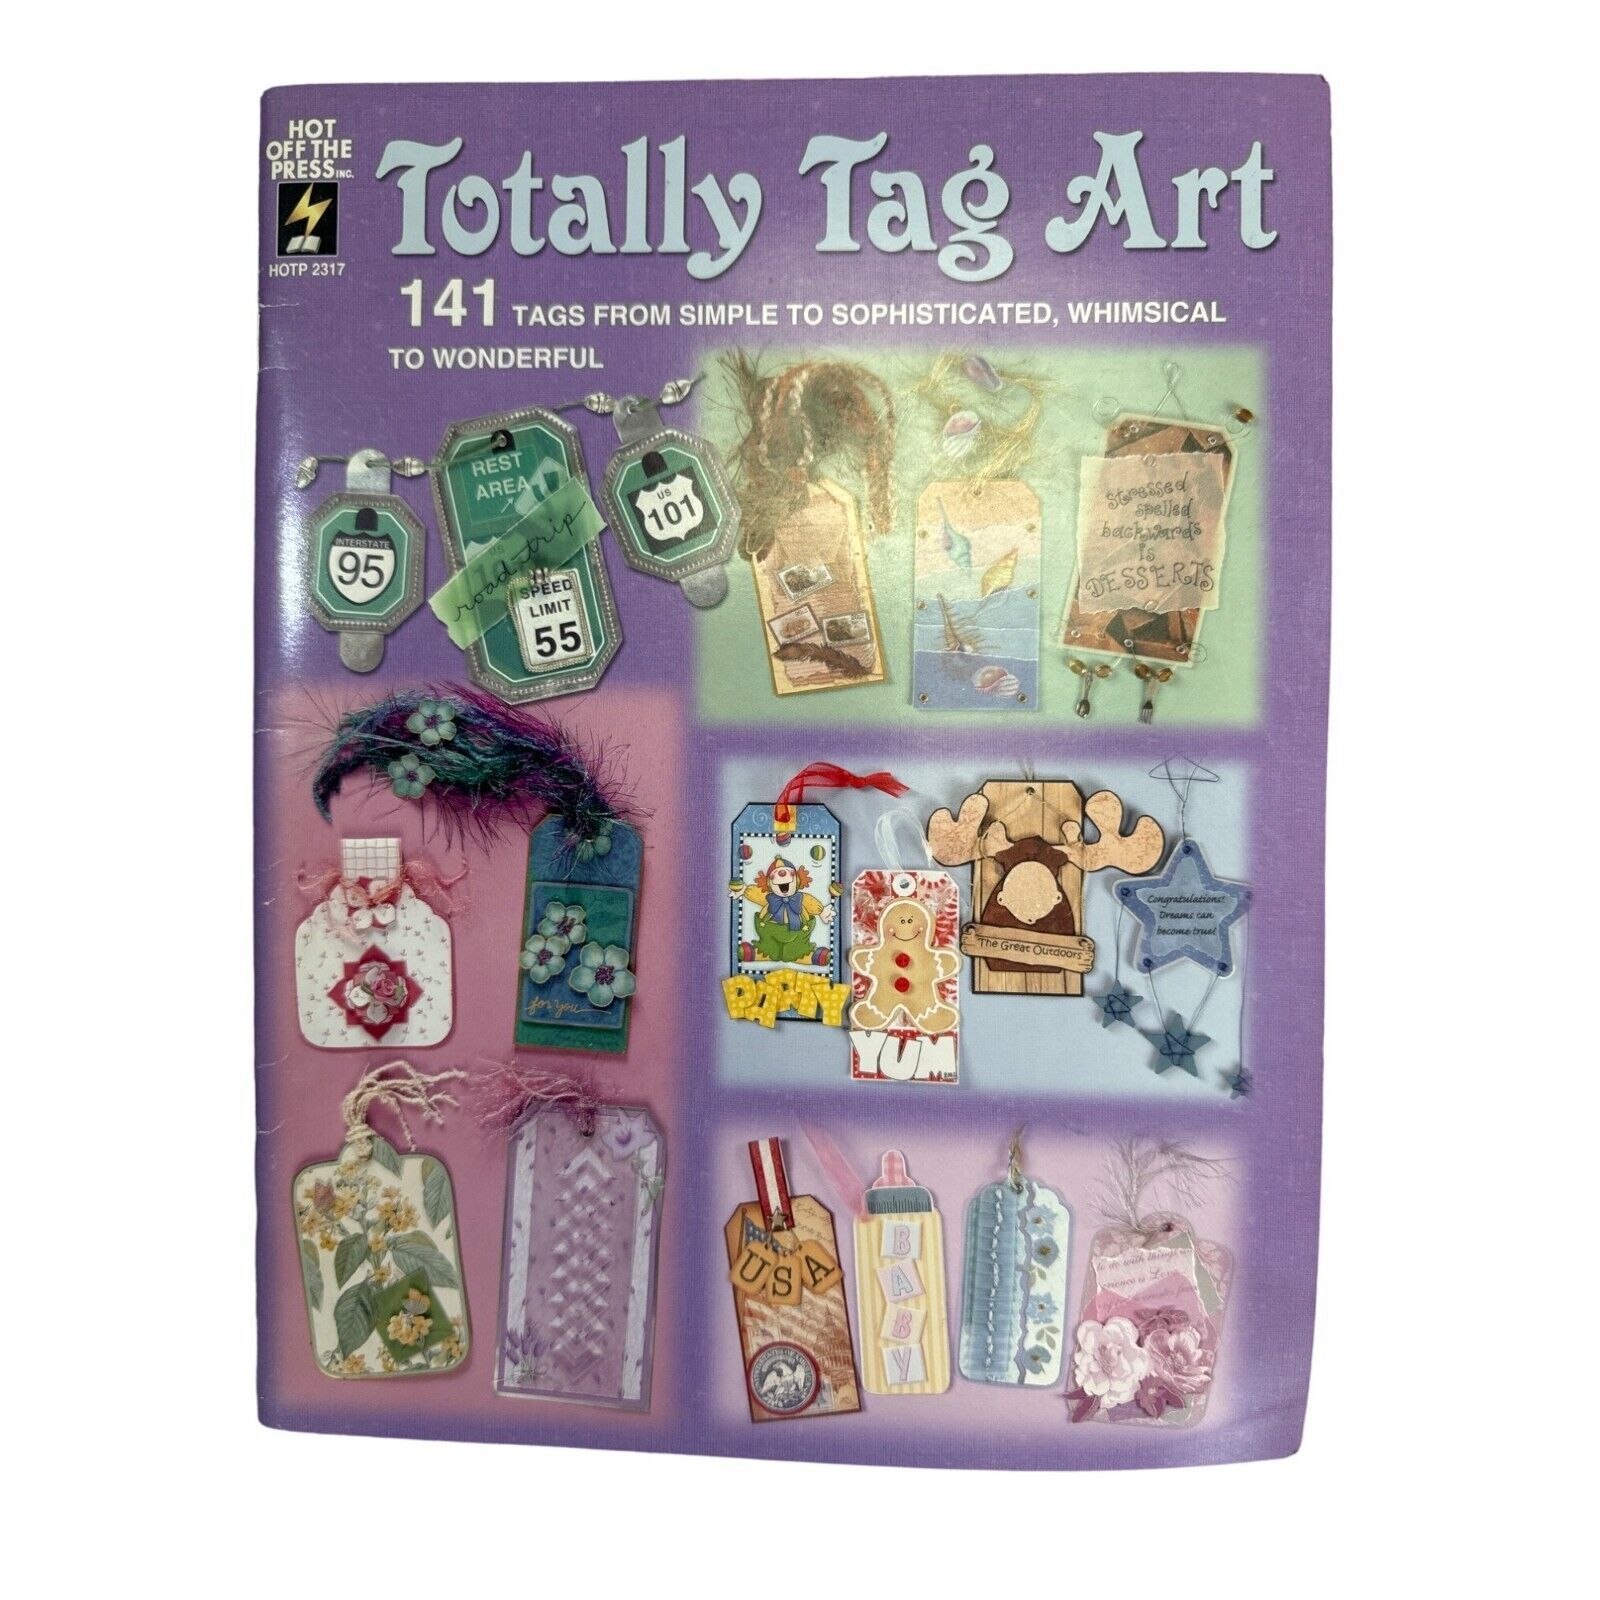 Totally Tag Art by Hot off the Press 141 Tag Ideas from Simple to Sophisticated - $14.84